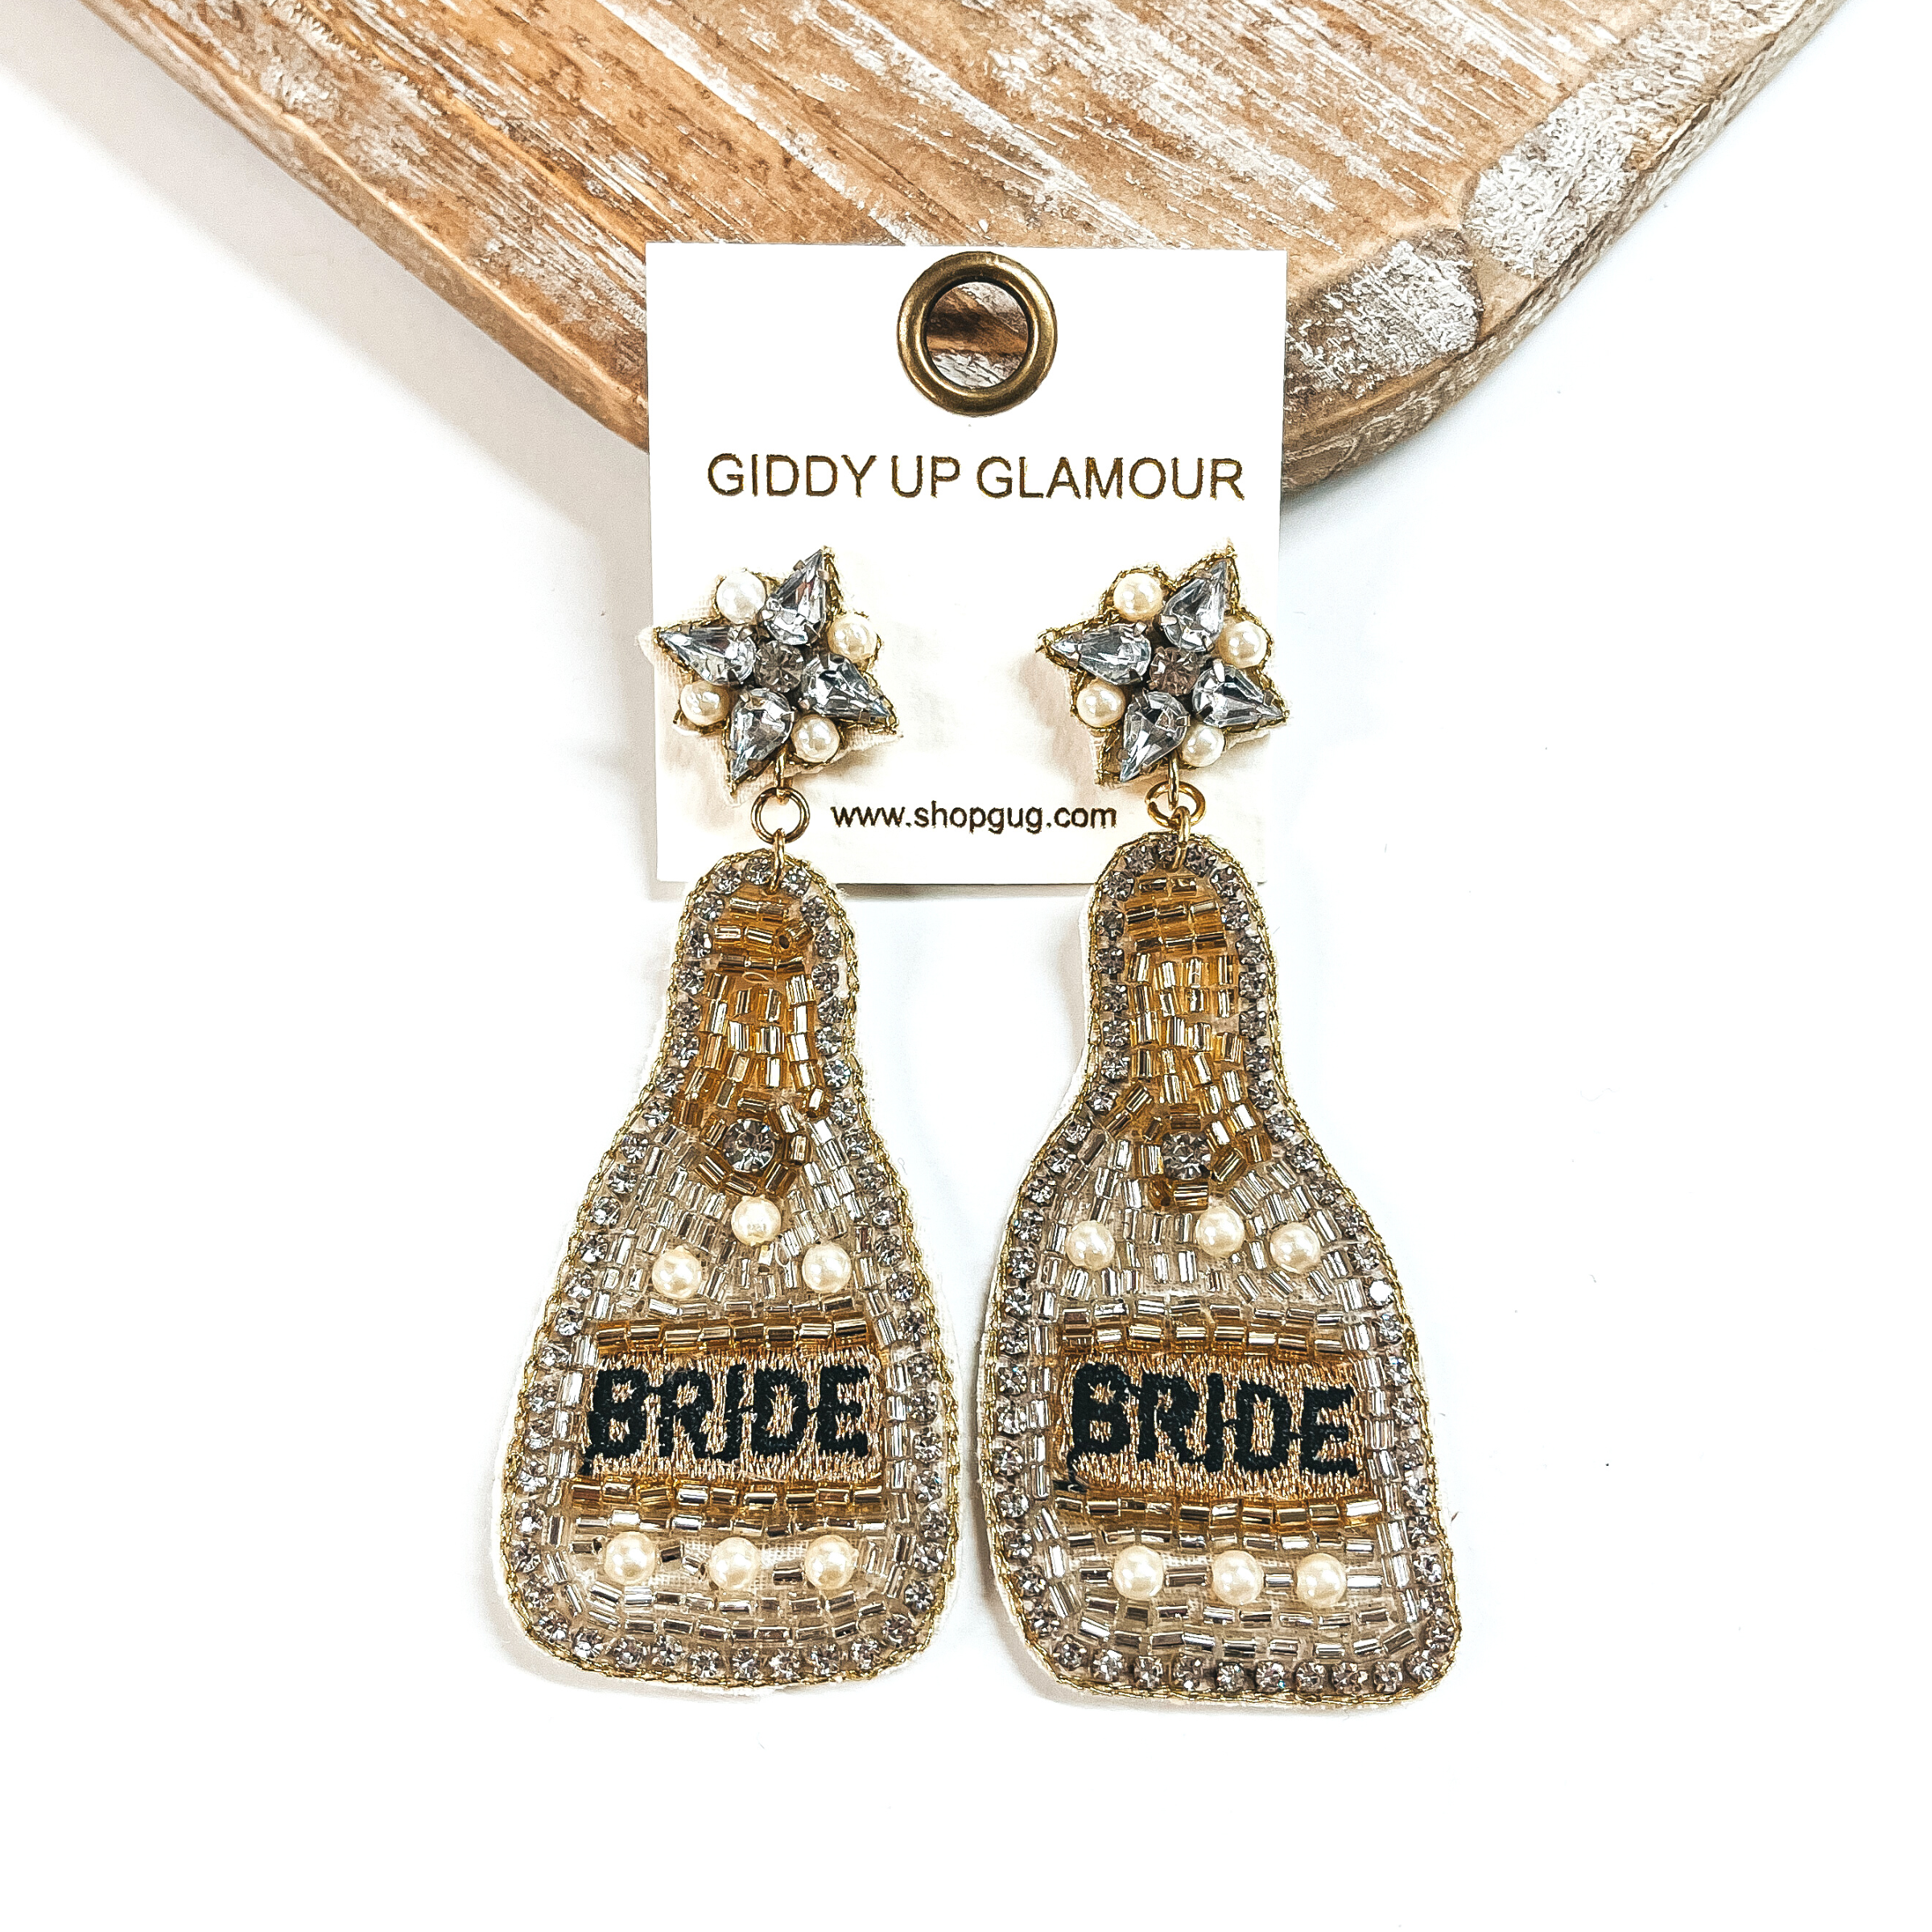 These are beaded bottle earrings in silver mix with pearls. The postback  has clear crystals and pearls with gold stitching around. The bottle drop has  clear rhinestones all around with silver, gold, and pearl beads. In the  center it says, Bride, in black and in a gold background. These earrings are  taken on a white background and leaning against a light wood slab.